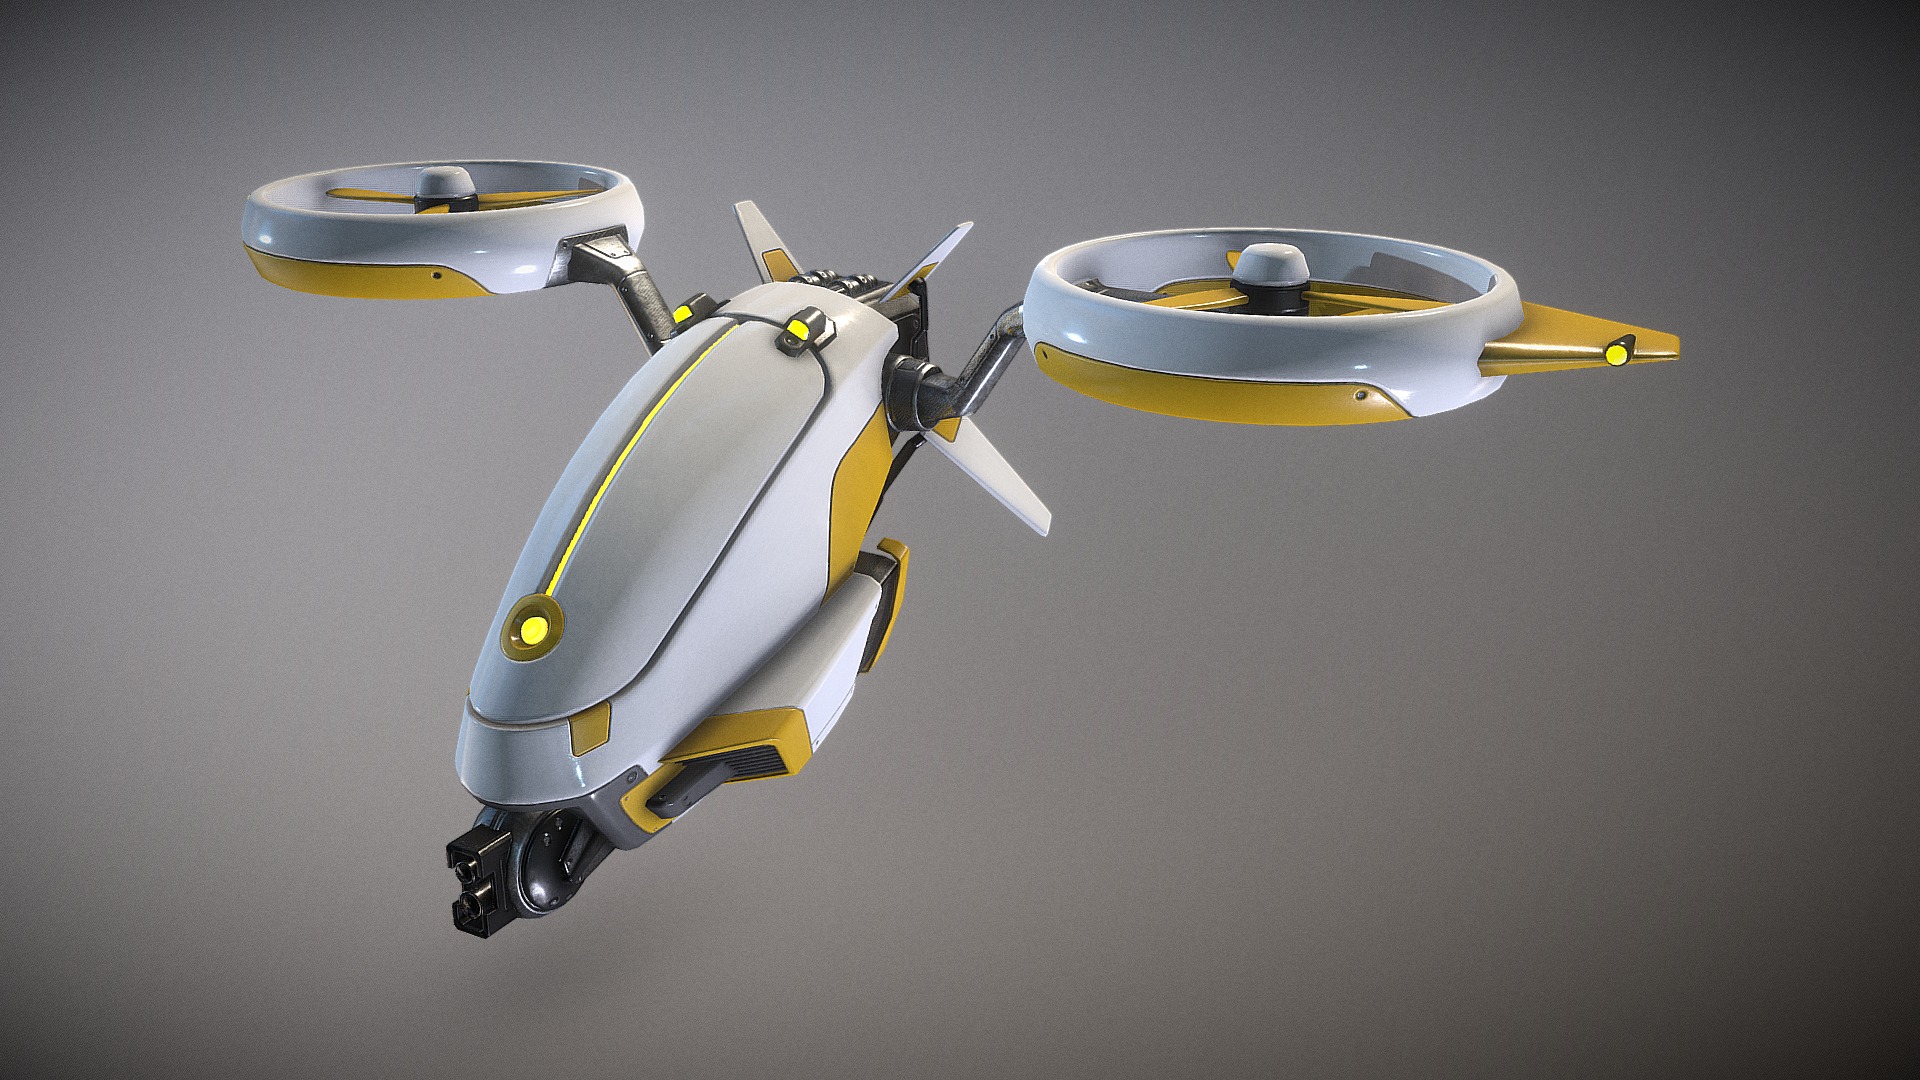 3D model E Drone - This is a 3D model of the E Drone. The 3D model is about a drone with a yellow and blue body.